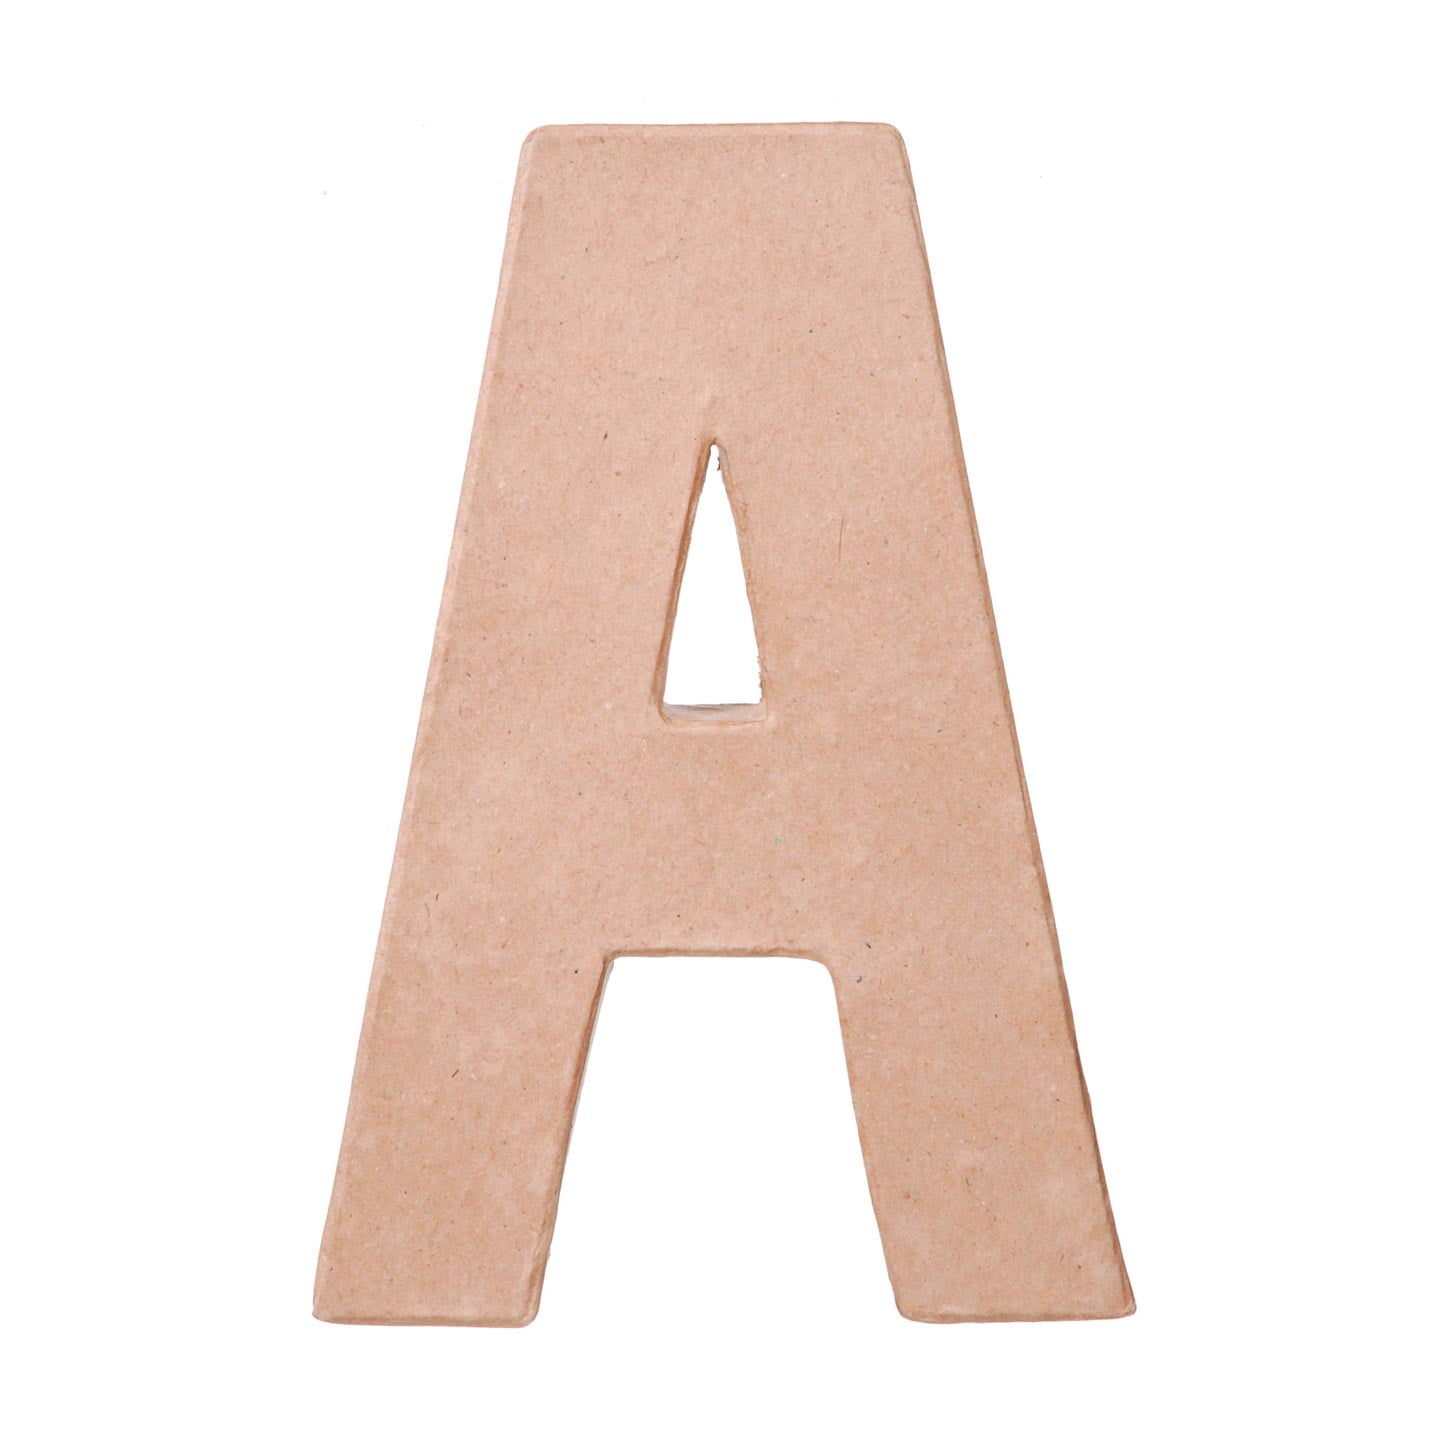 2 Pack Paper Mache Letter S 8 X 5.5 Inches